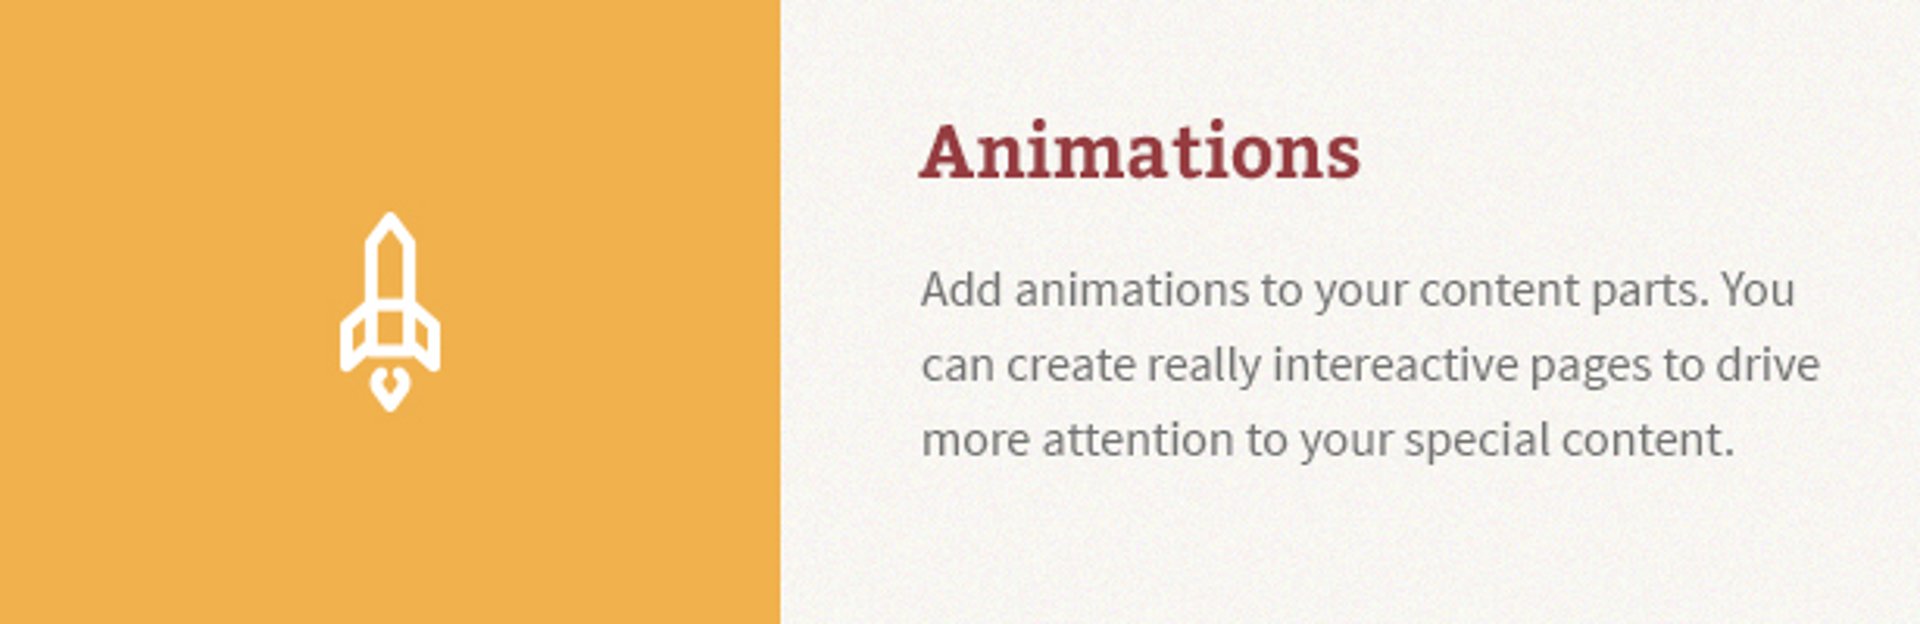 Pet Rescue - Animals and Shelter Charity WP Theme - Animations | cmsmasters studio